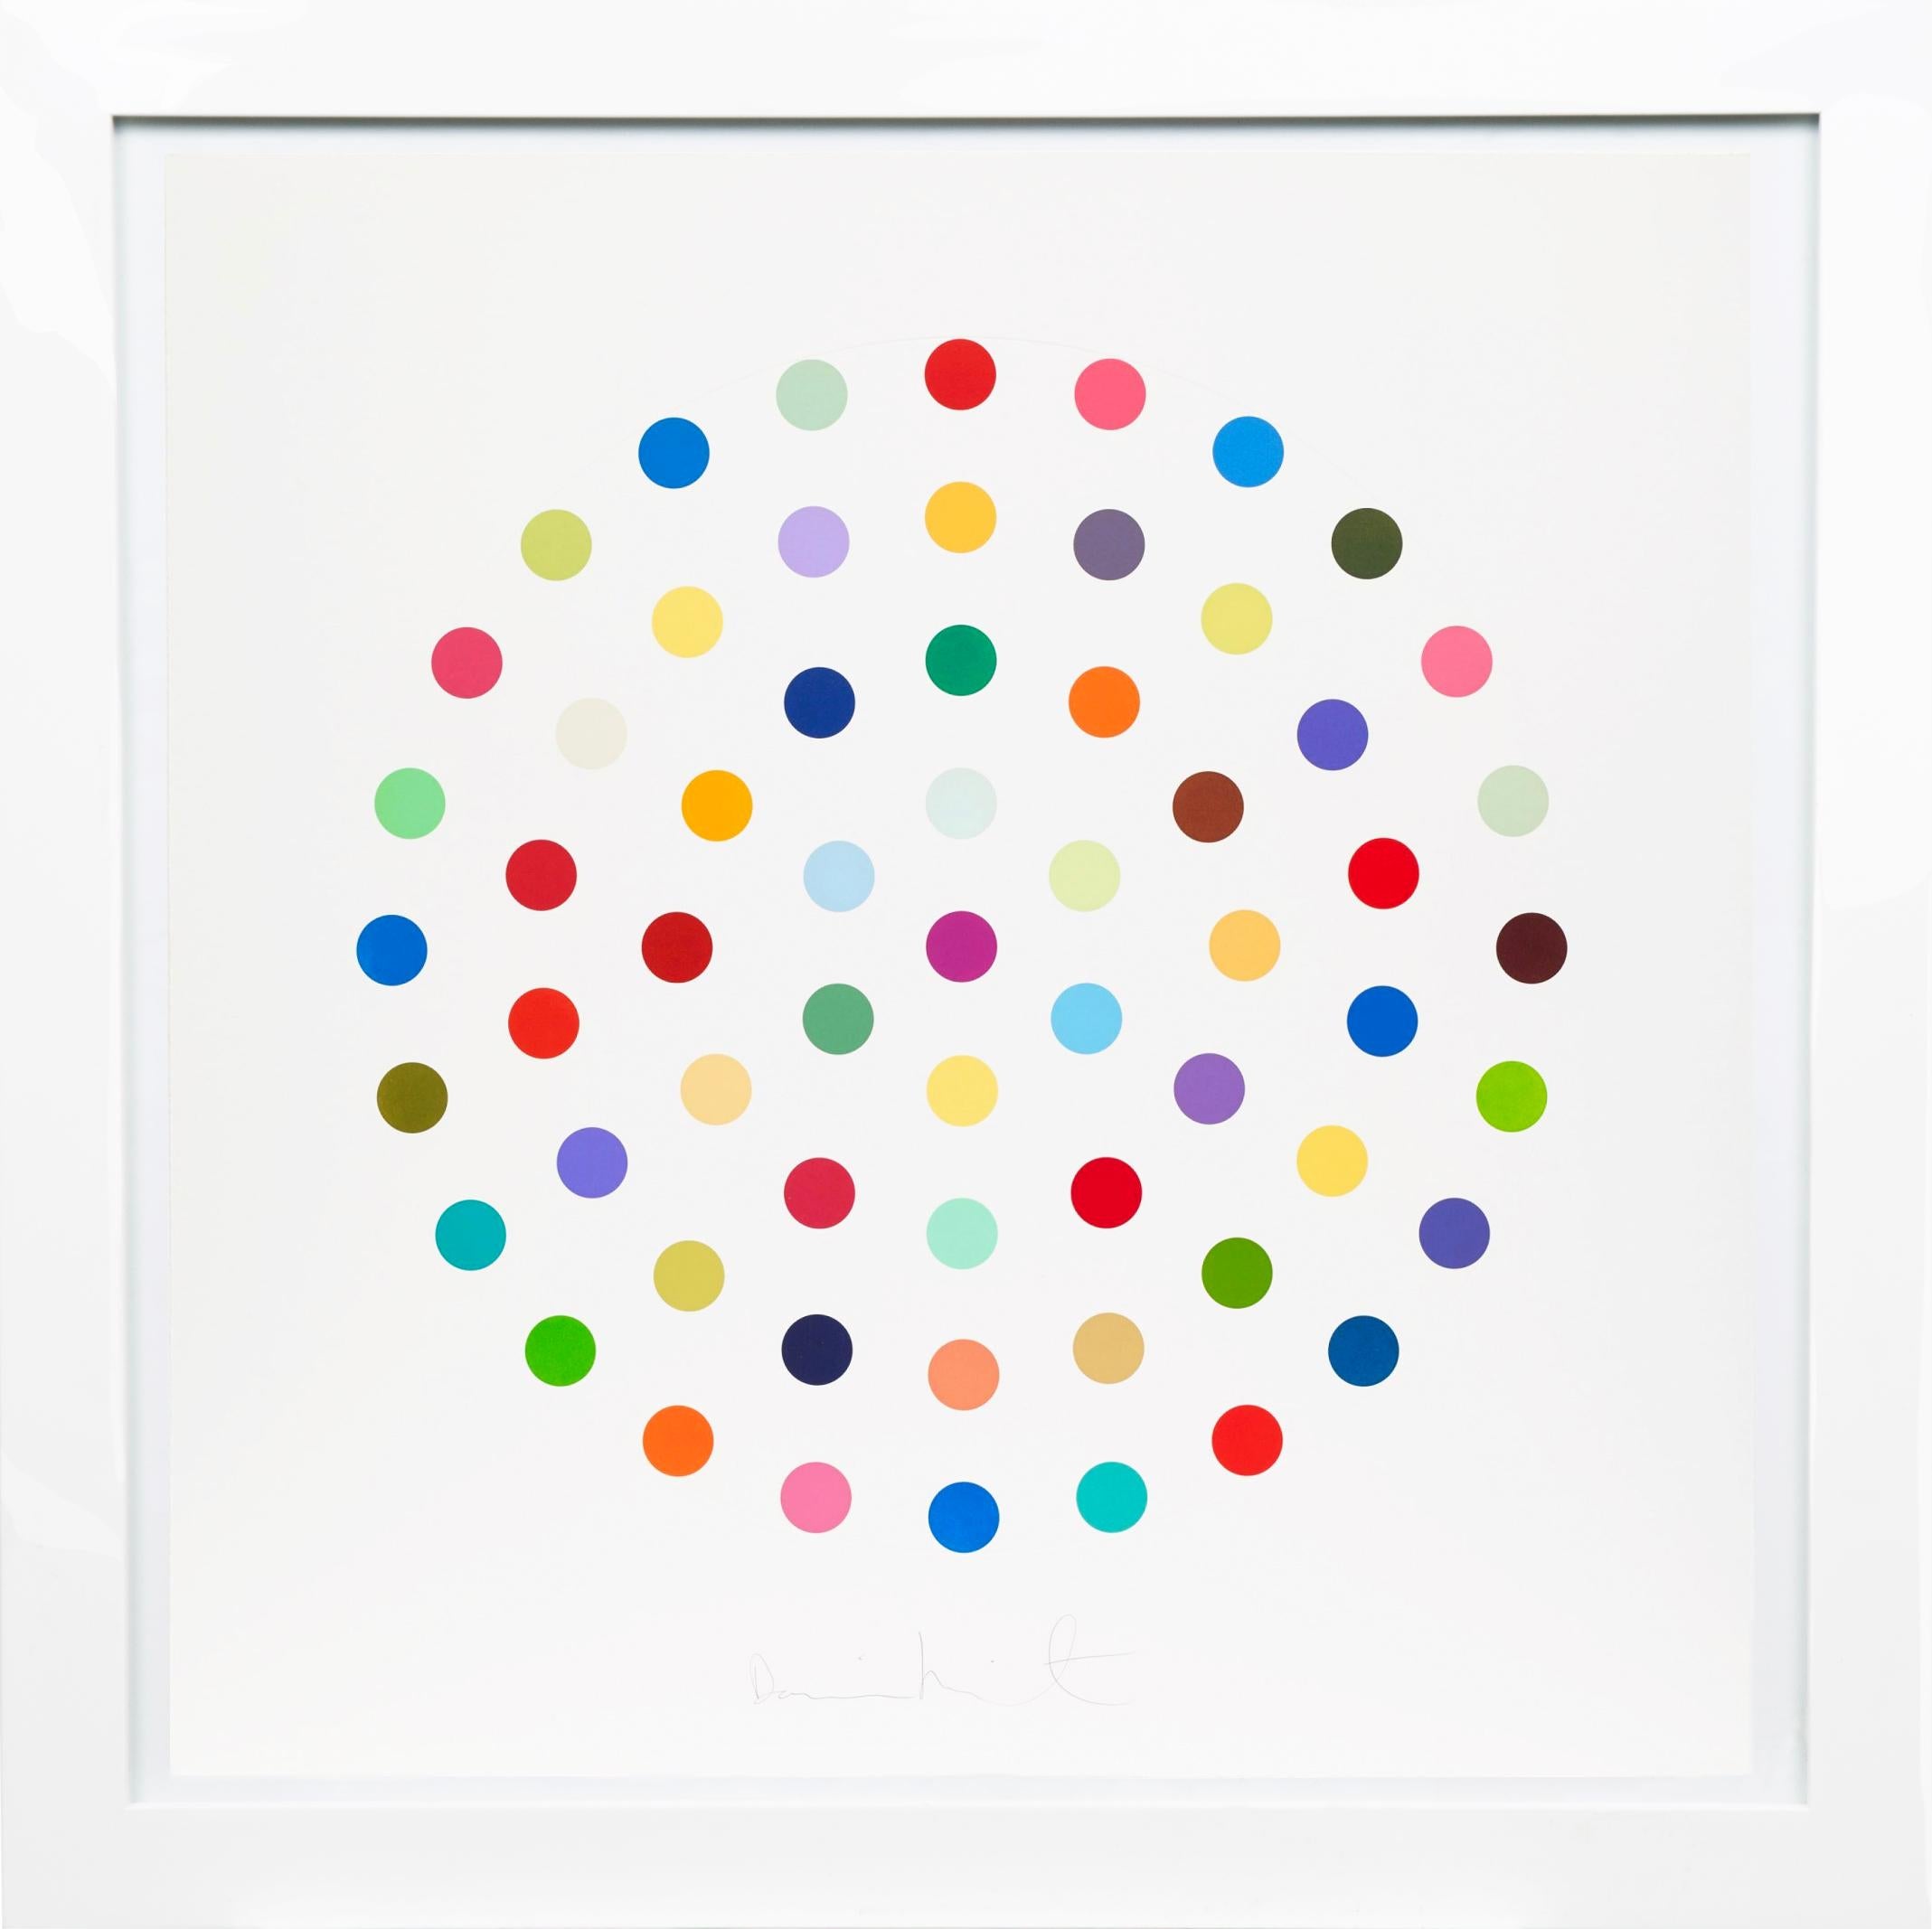 The Multi-color Spots by Damien Hirst is hand etched with aquatint in his signature, never repeated, palette of bright colors. Signed by the artist in pencil on the lower center and numbered on verso. This artwork comes in a custom made museum